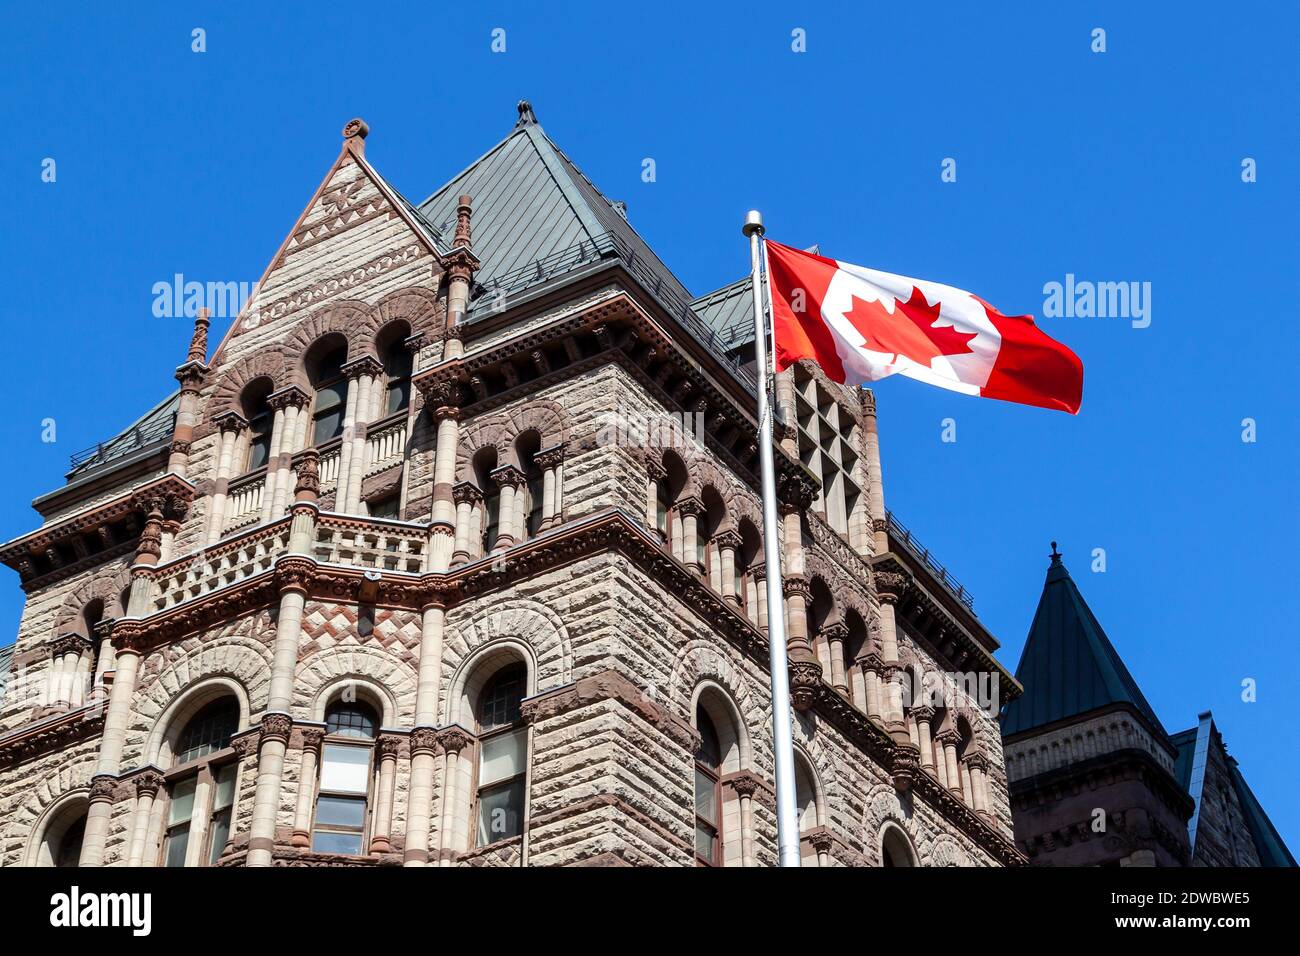 Toronto, Canada - May 16, 2020: The waving Canadian flag with Old City Hall in background in Toronto, Canada. Stock Photo